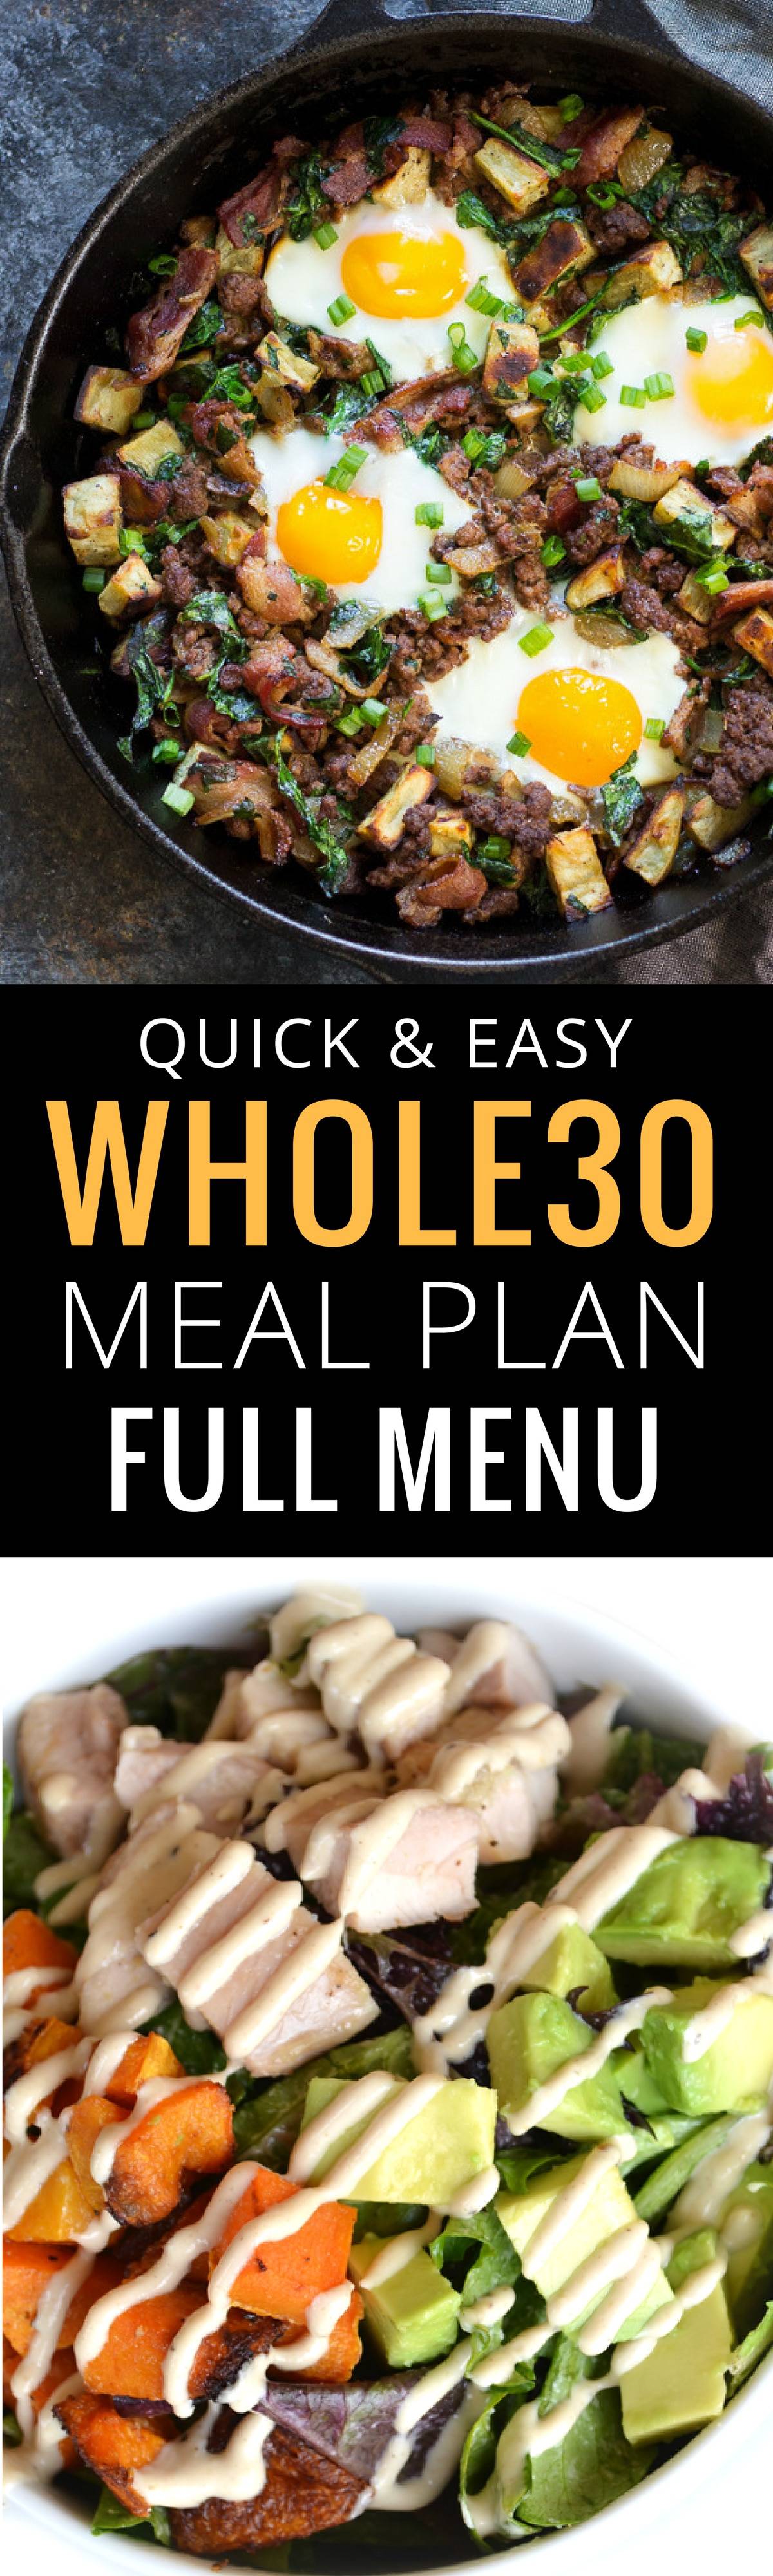 A Whole30 meal plan that's quick and healthy! Whole30 recipes just for you. Best Trader Joe’s shopping list. Whole30 meal planning. Whole30 meal prep. Healthy paleo meals. Healthy Whole30 recipes. Easy Whole30 recipes.